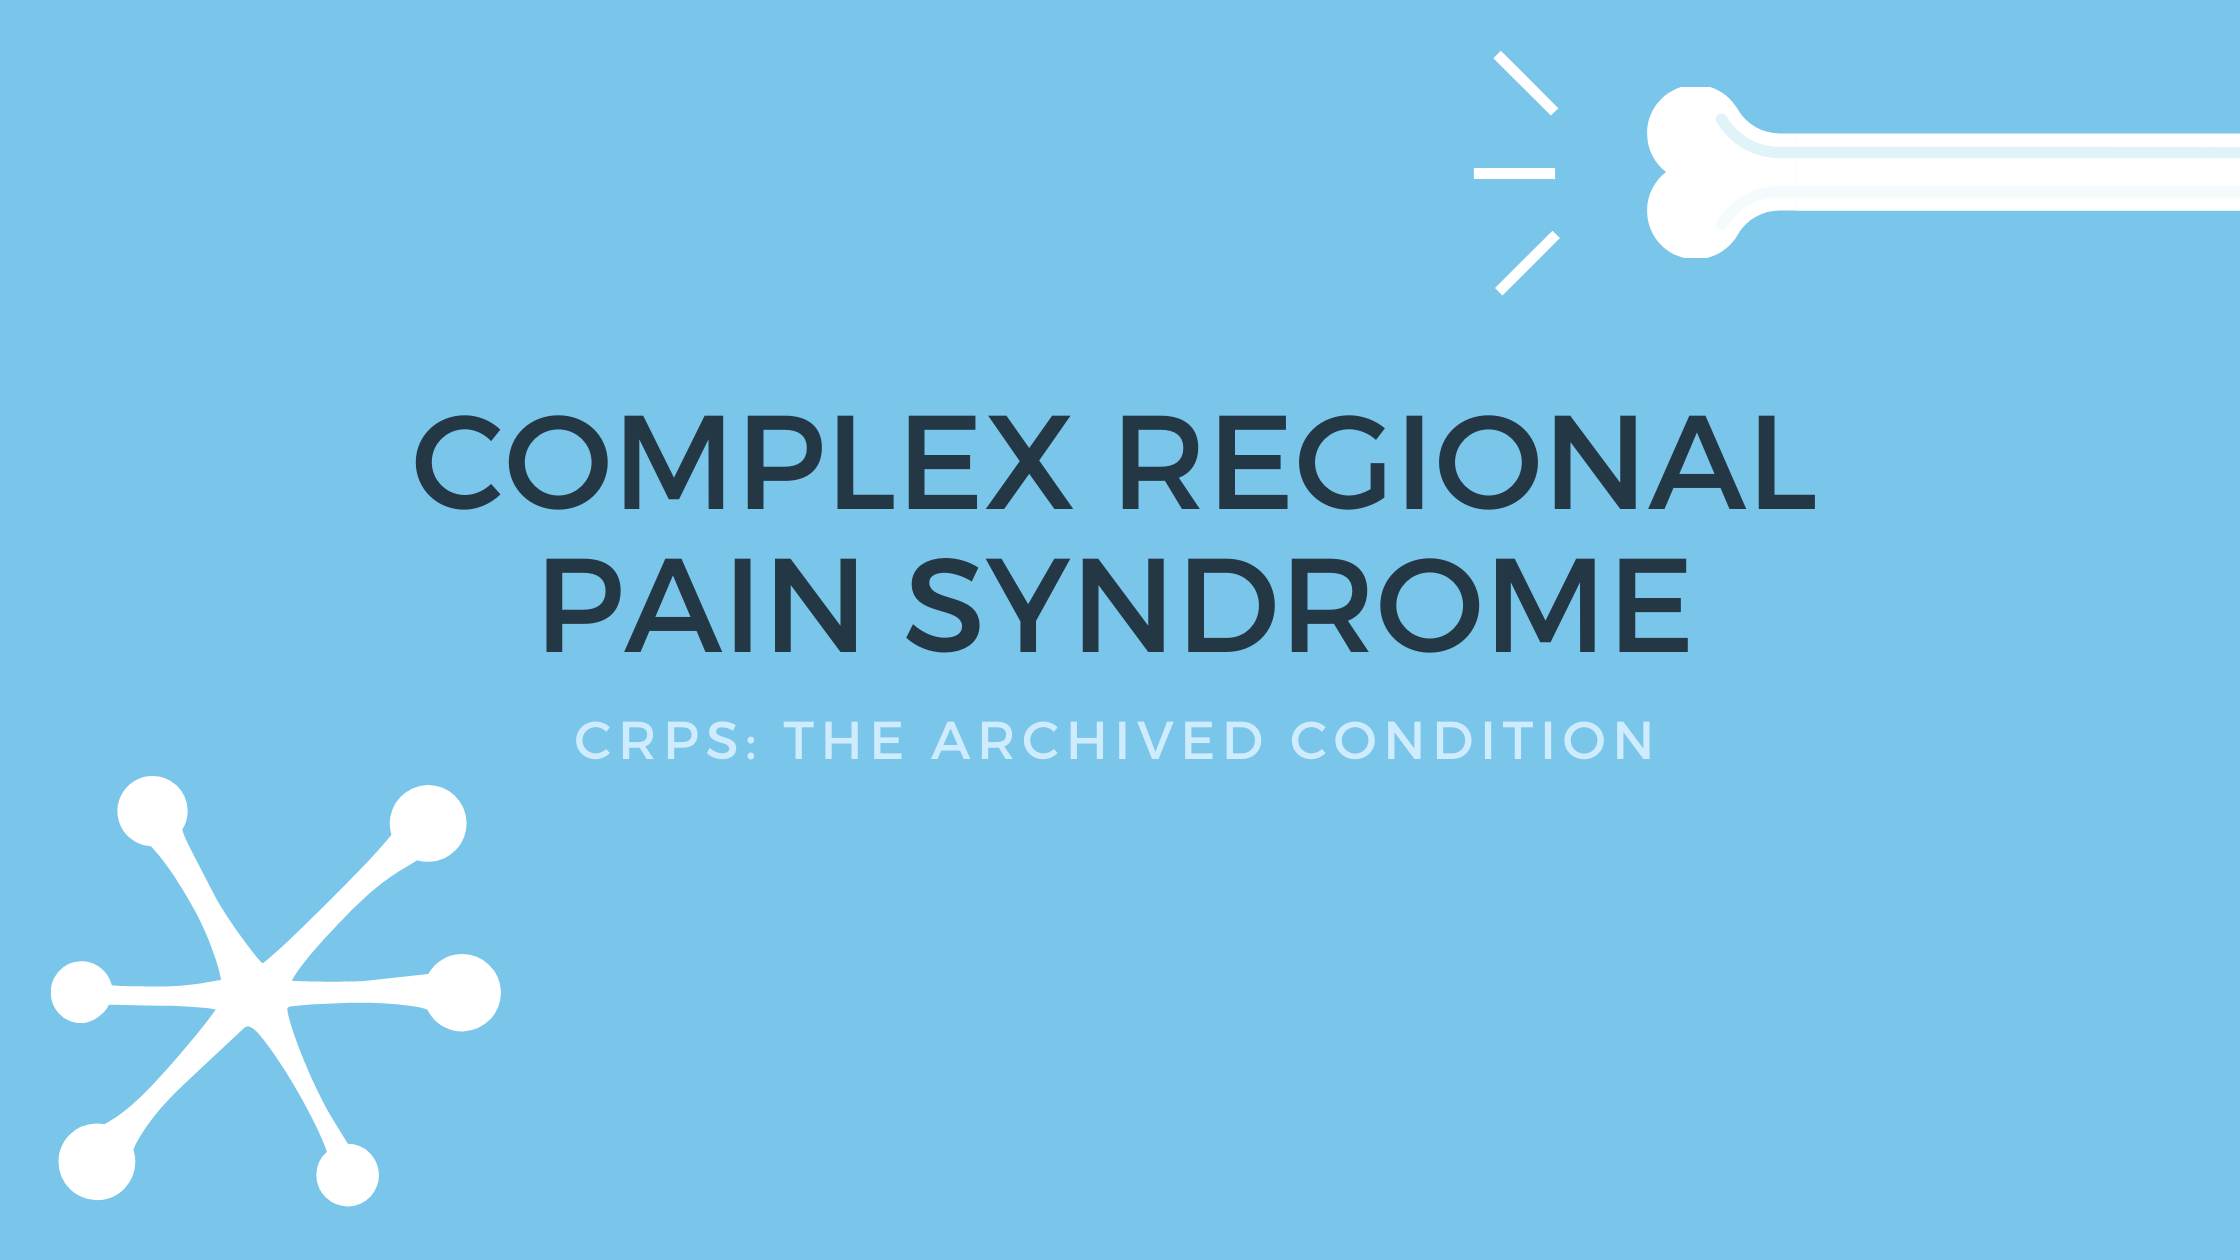 CRPS stages